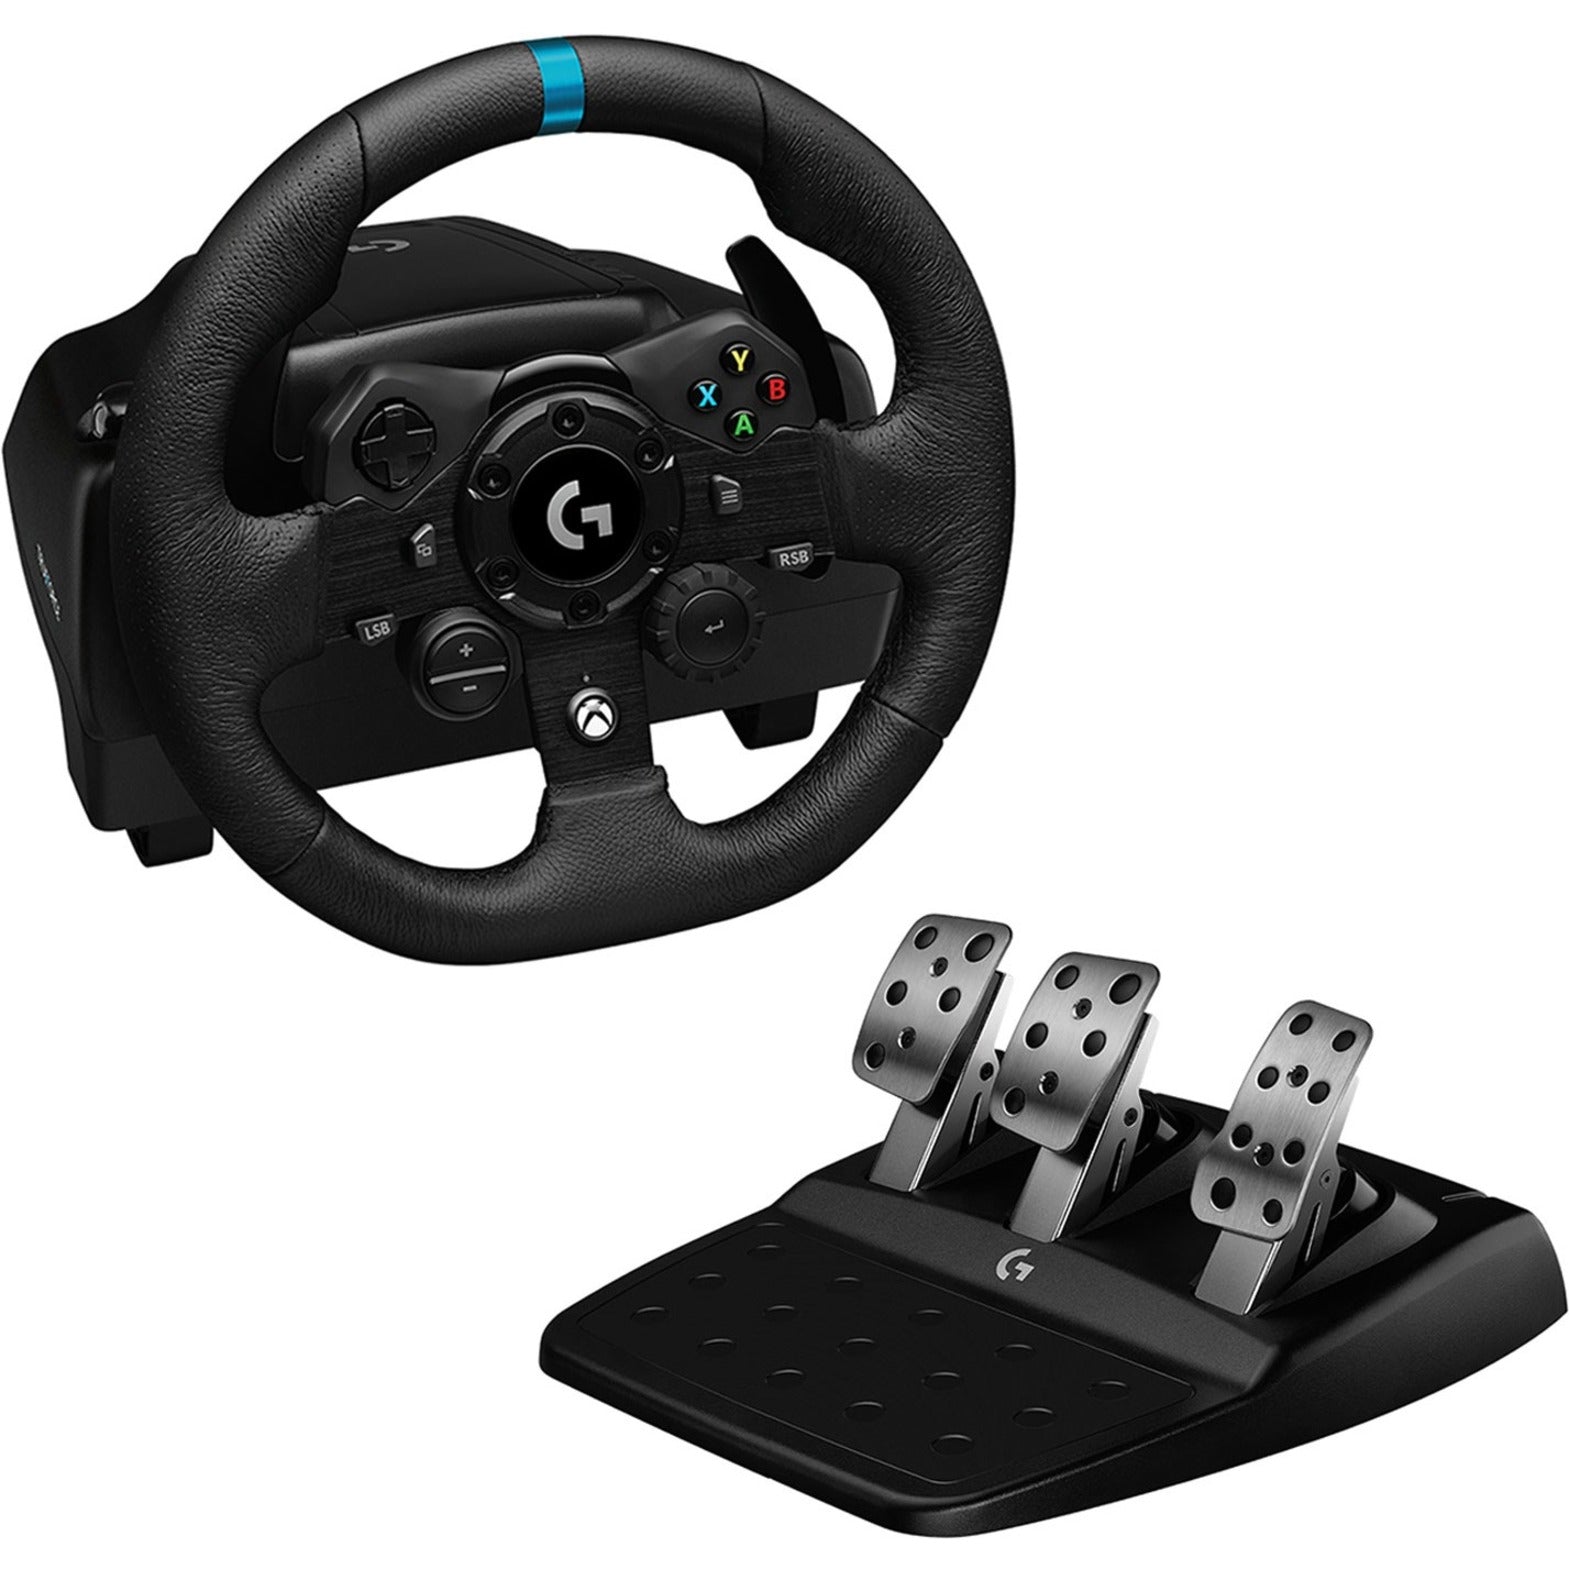 Logitech 941-000156 G923 TRUEFORCE Racing wheel for Xbox, PlayStation and PC, 2 Year Limited Warranty, USB Connectivity, Black